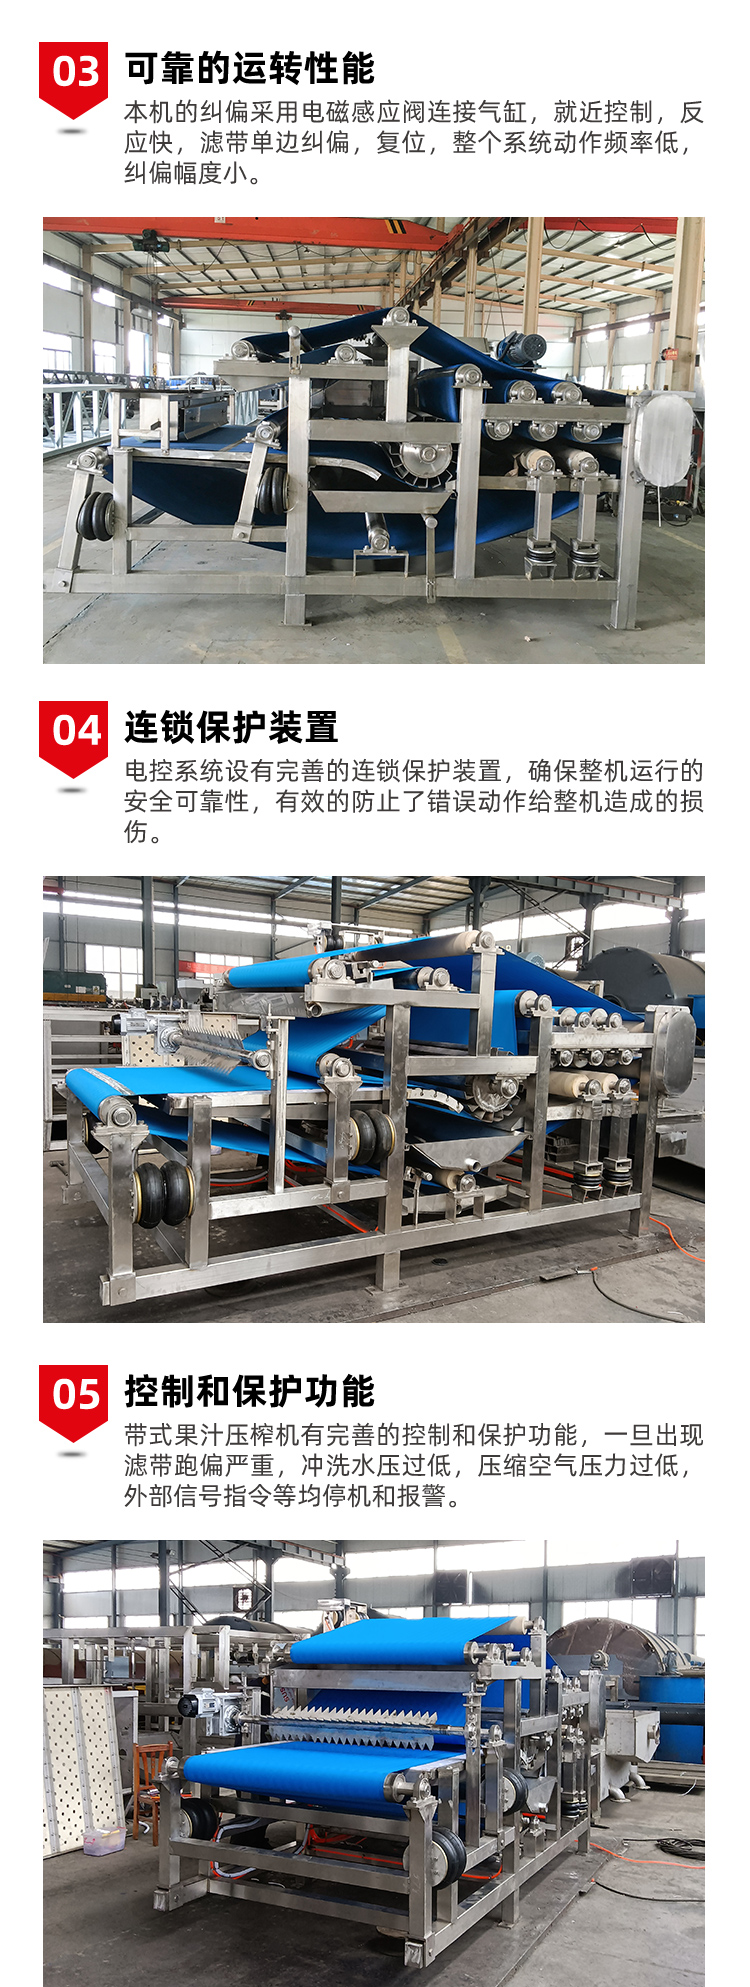 Tofu residue dehydration and drying machine, juicer, fruit and vegetable juice processing equipment, Nuokun Environmental Protection